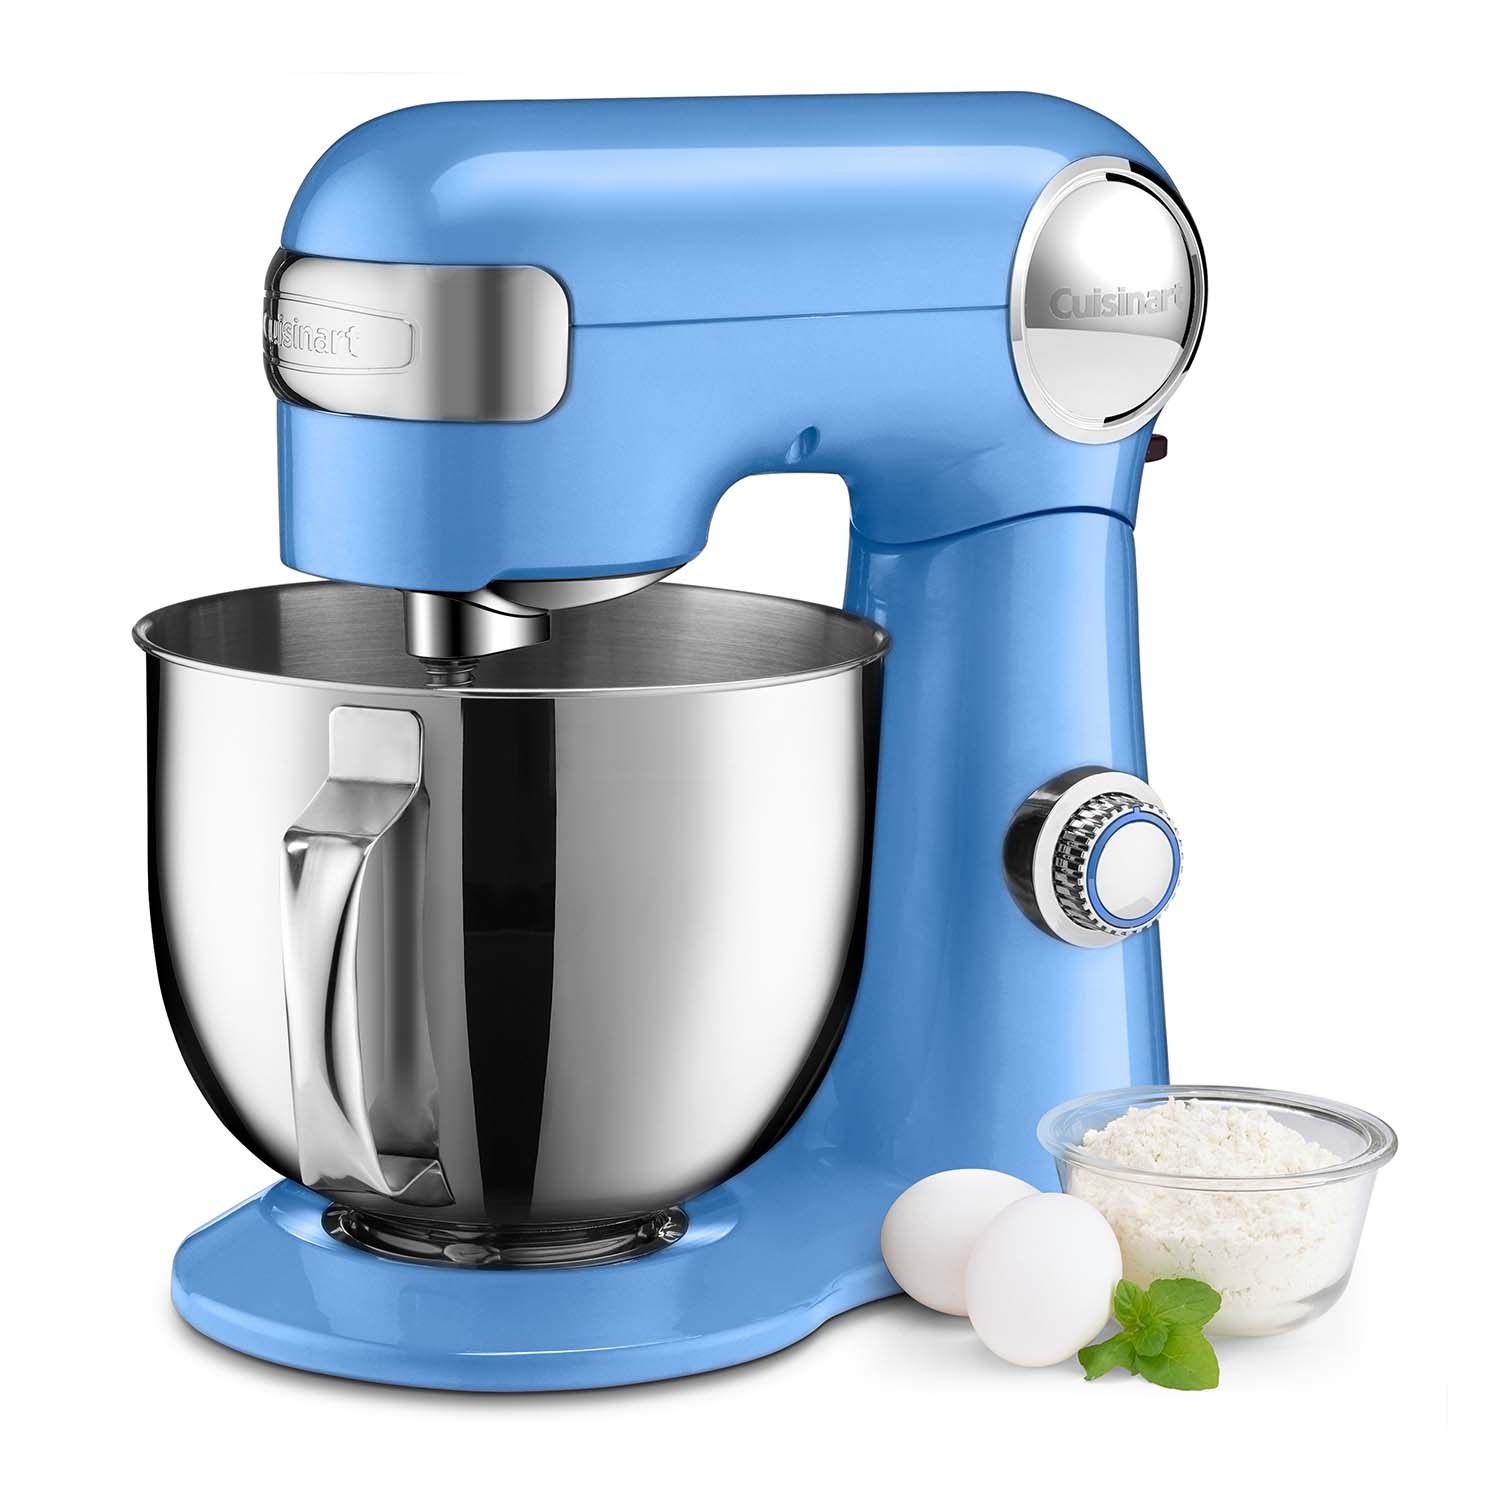 slide 1 of 1, Cuisinart Stand Mixer, Periwinkle, 5.5 qt